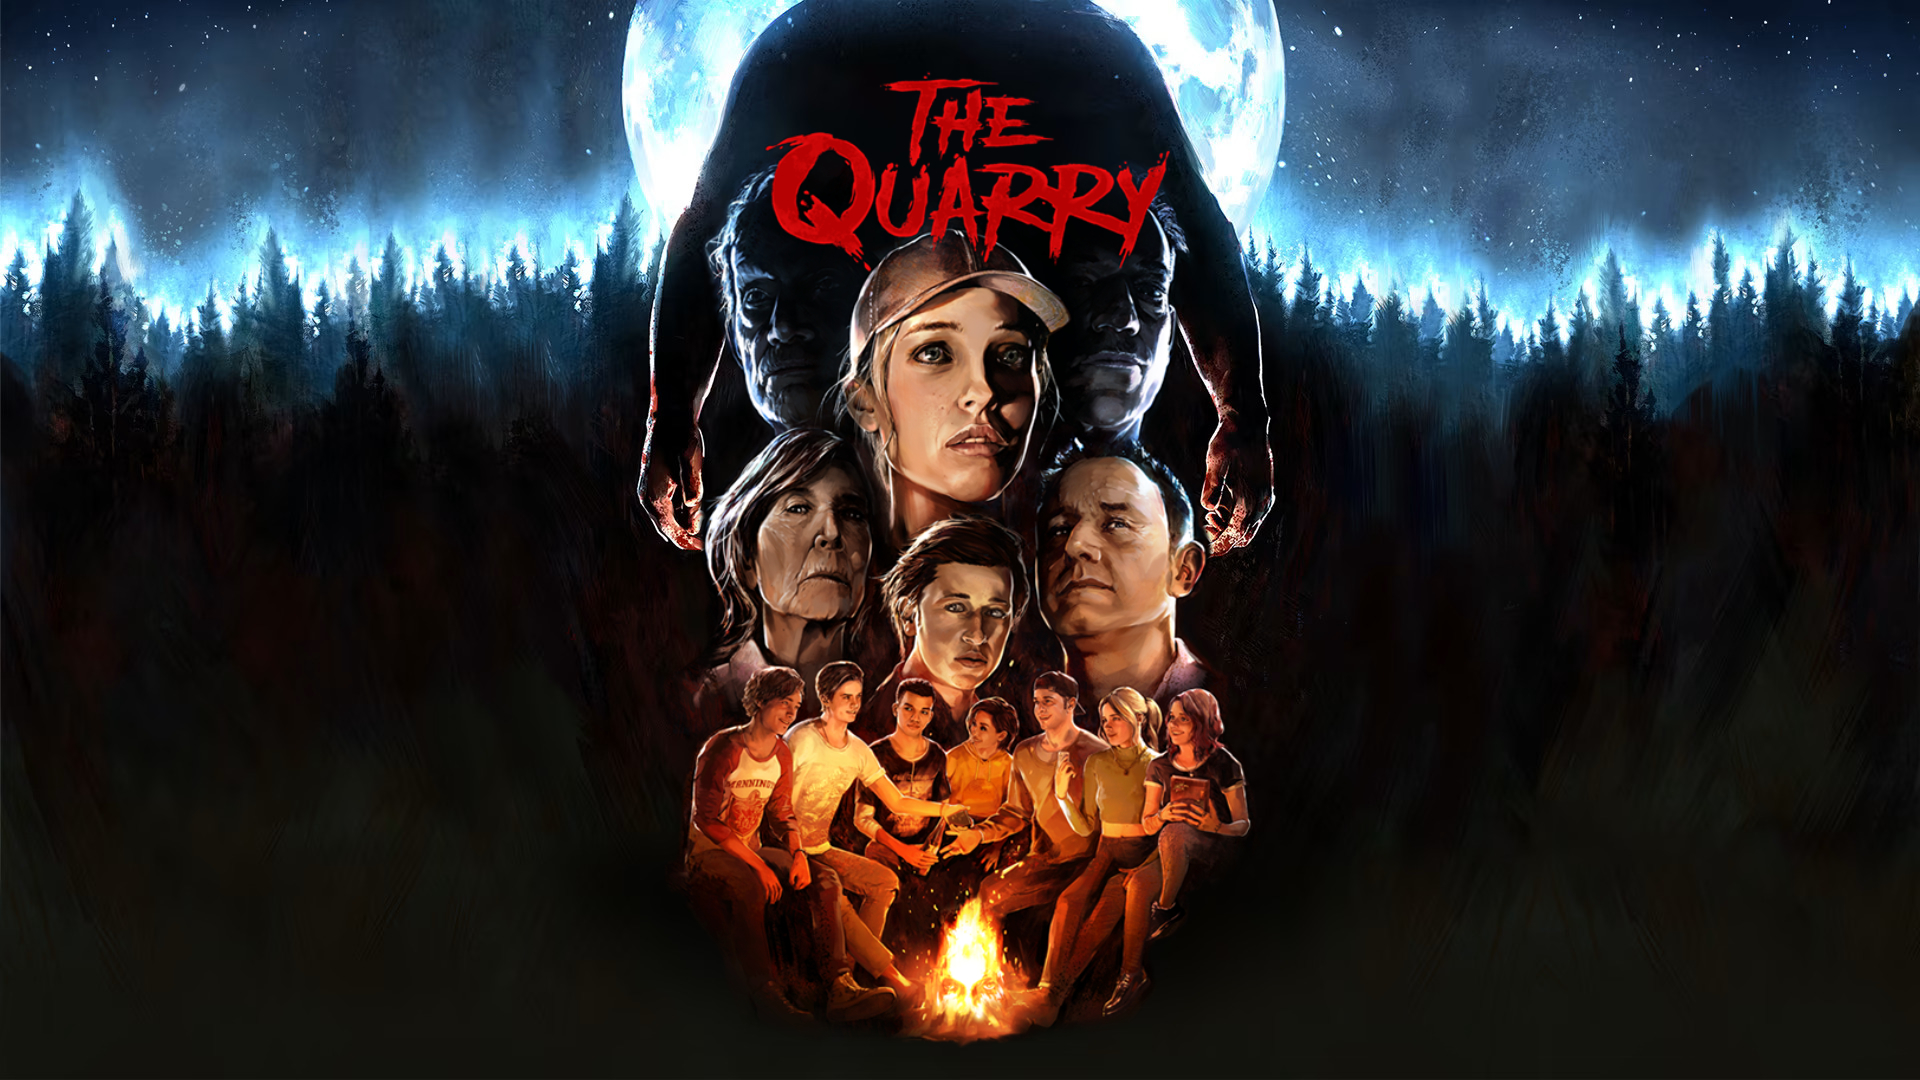 The Quarry system requirements